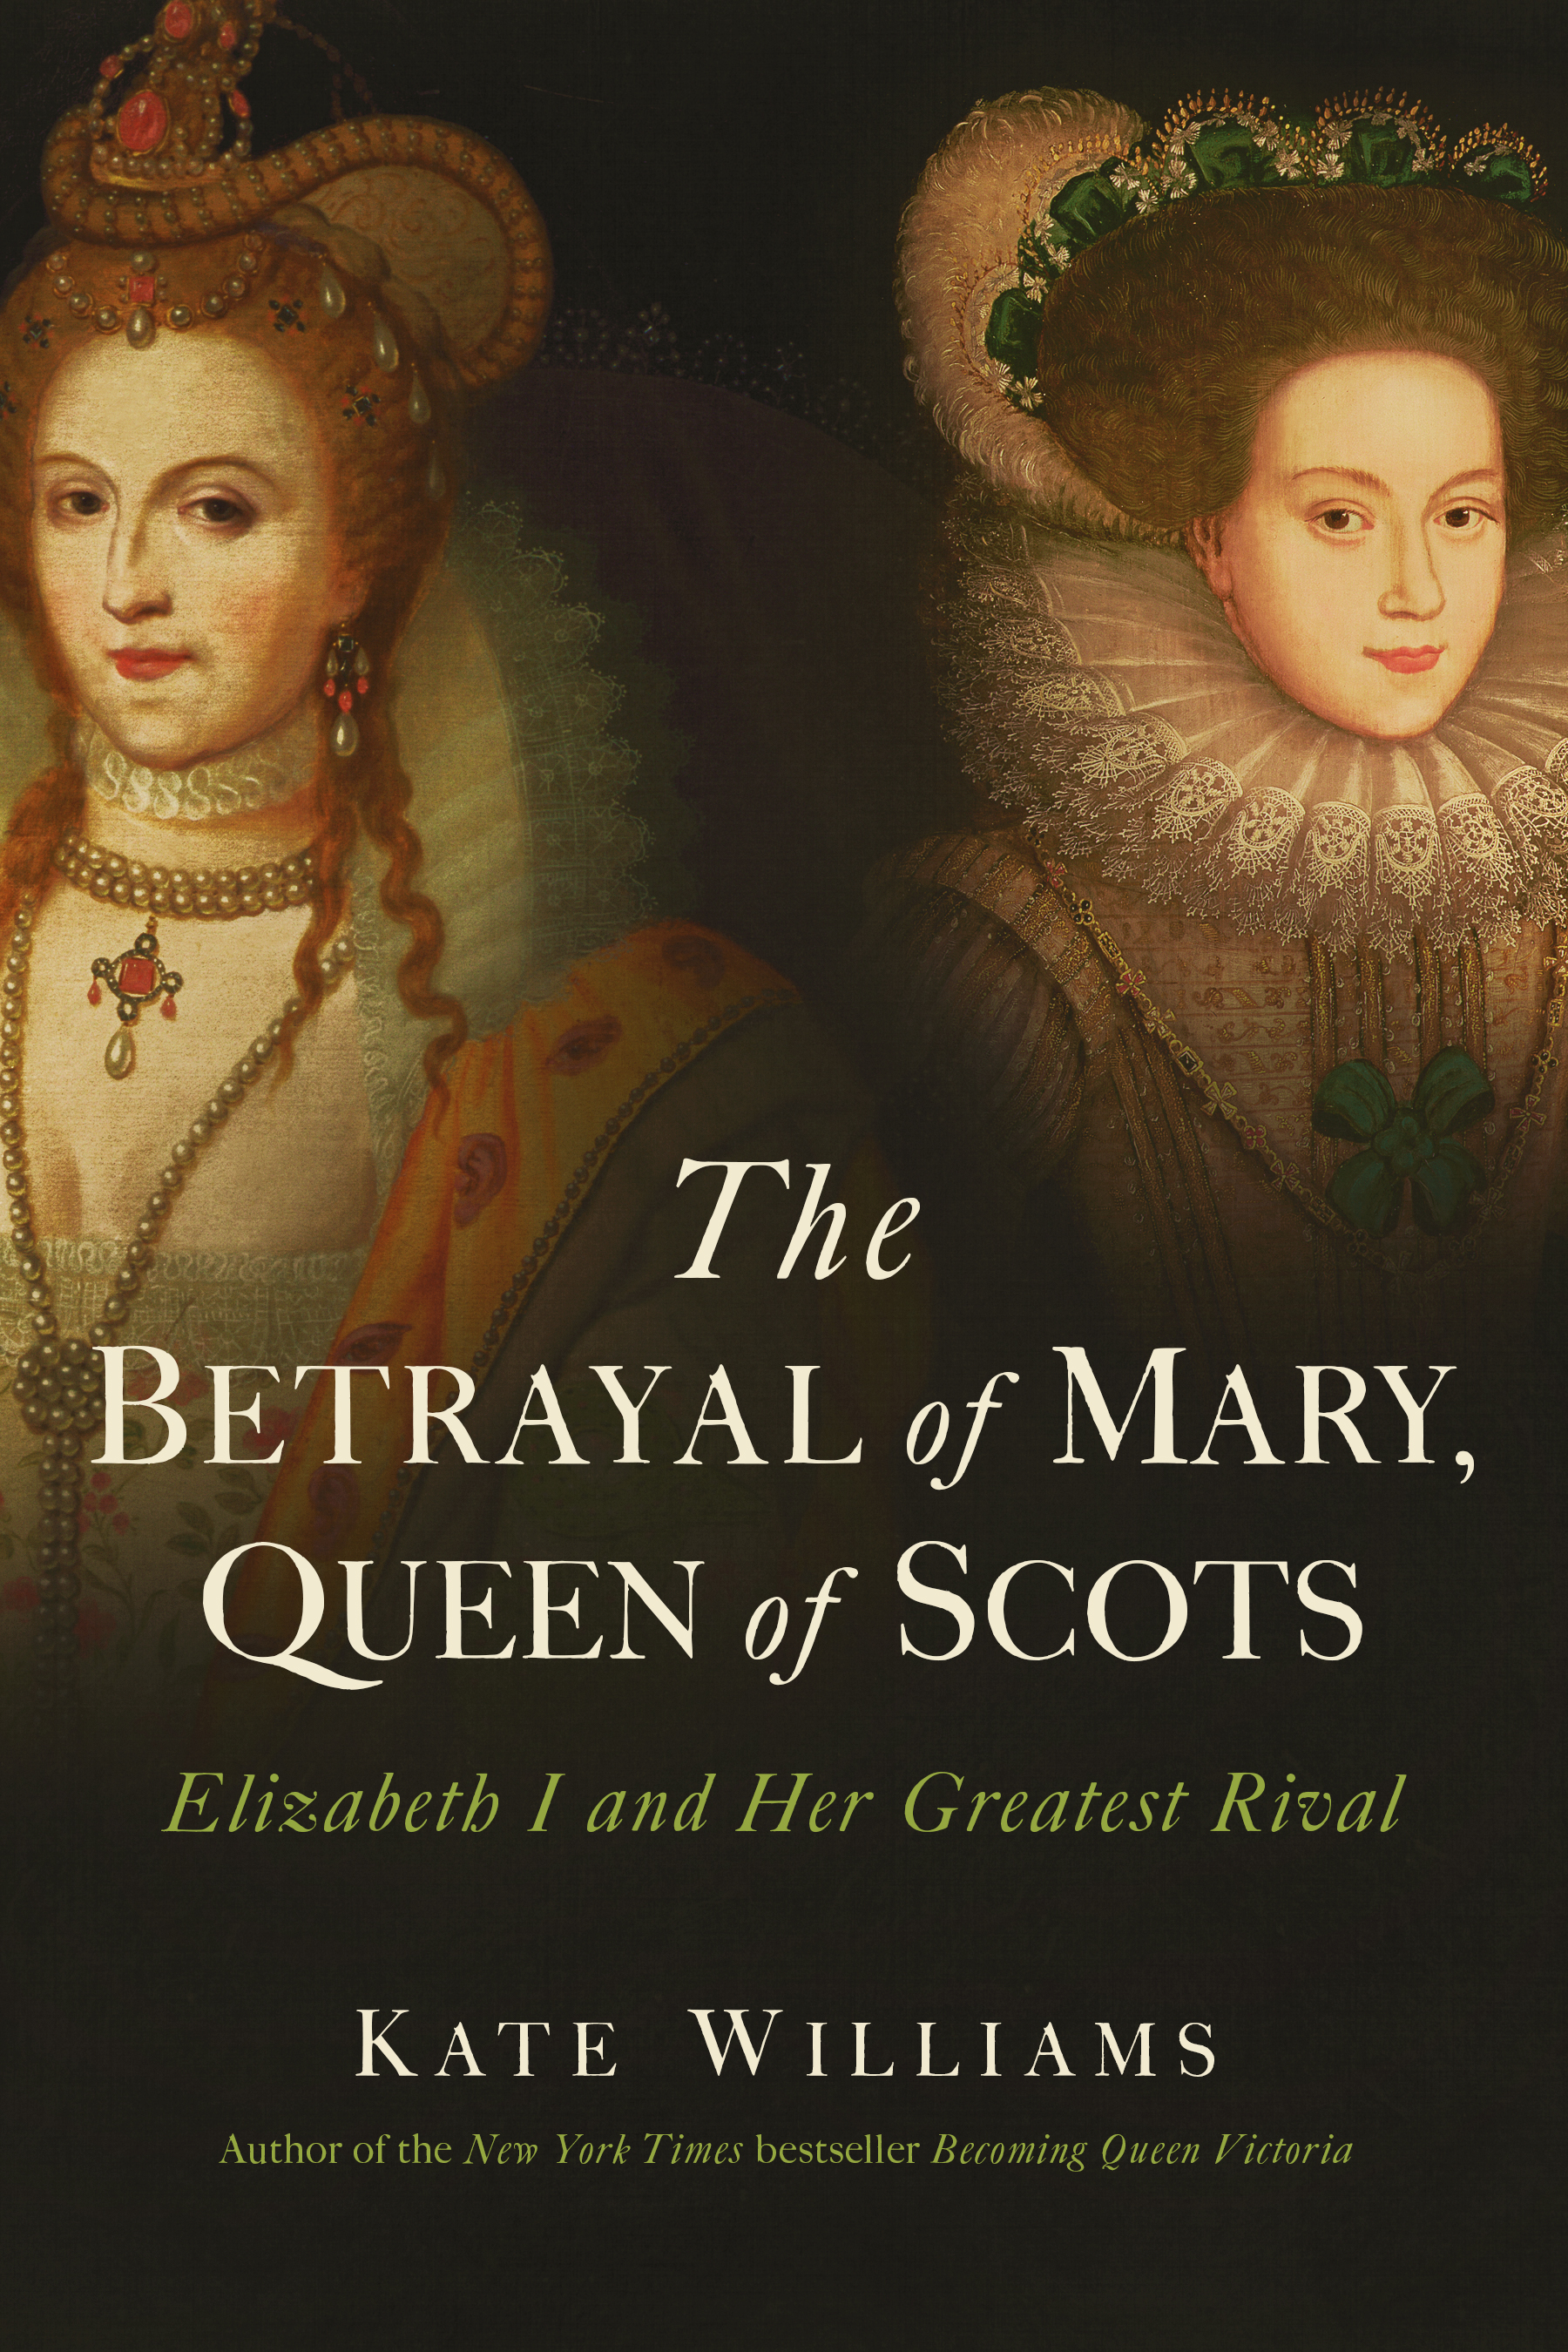 The B ETRAYAL of M ARY Q UEEN of S COTS The BETRAYAL of MARY QUEEN of SCOTS - photo 1